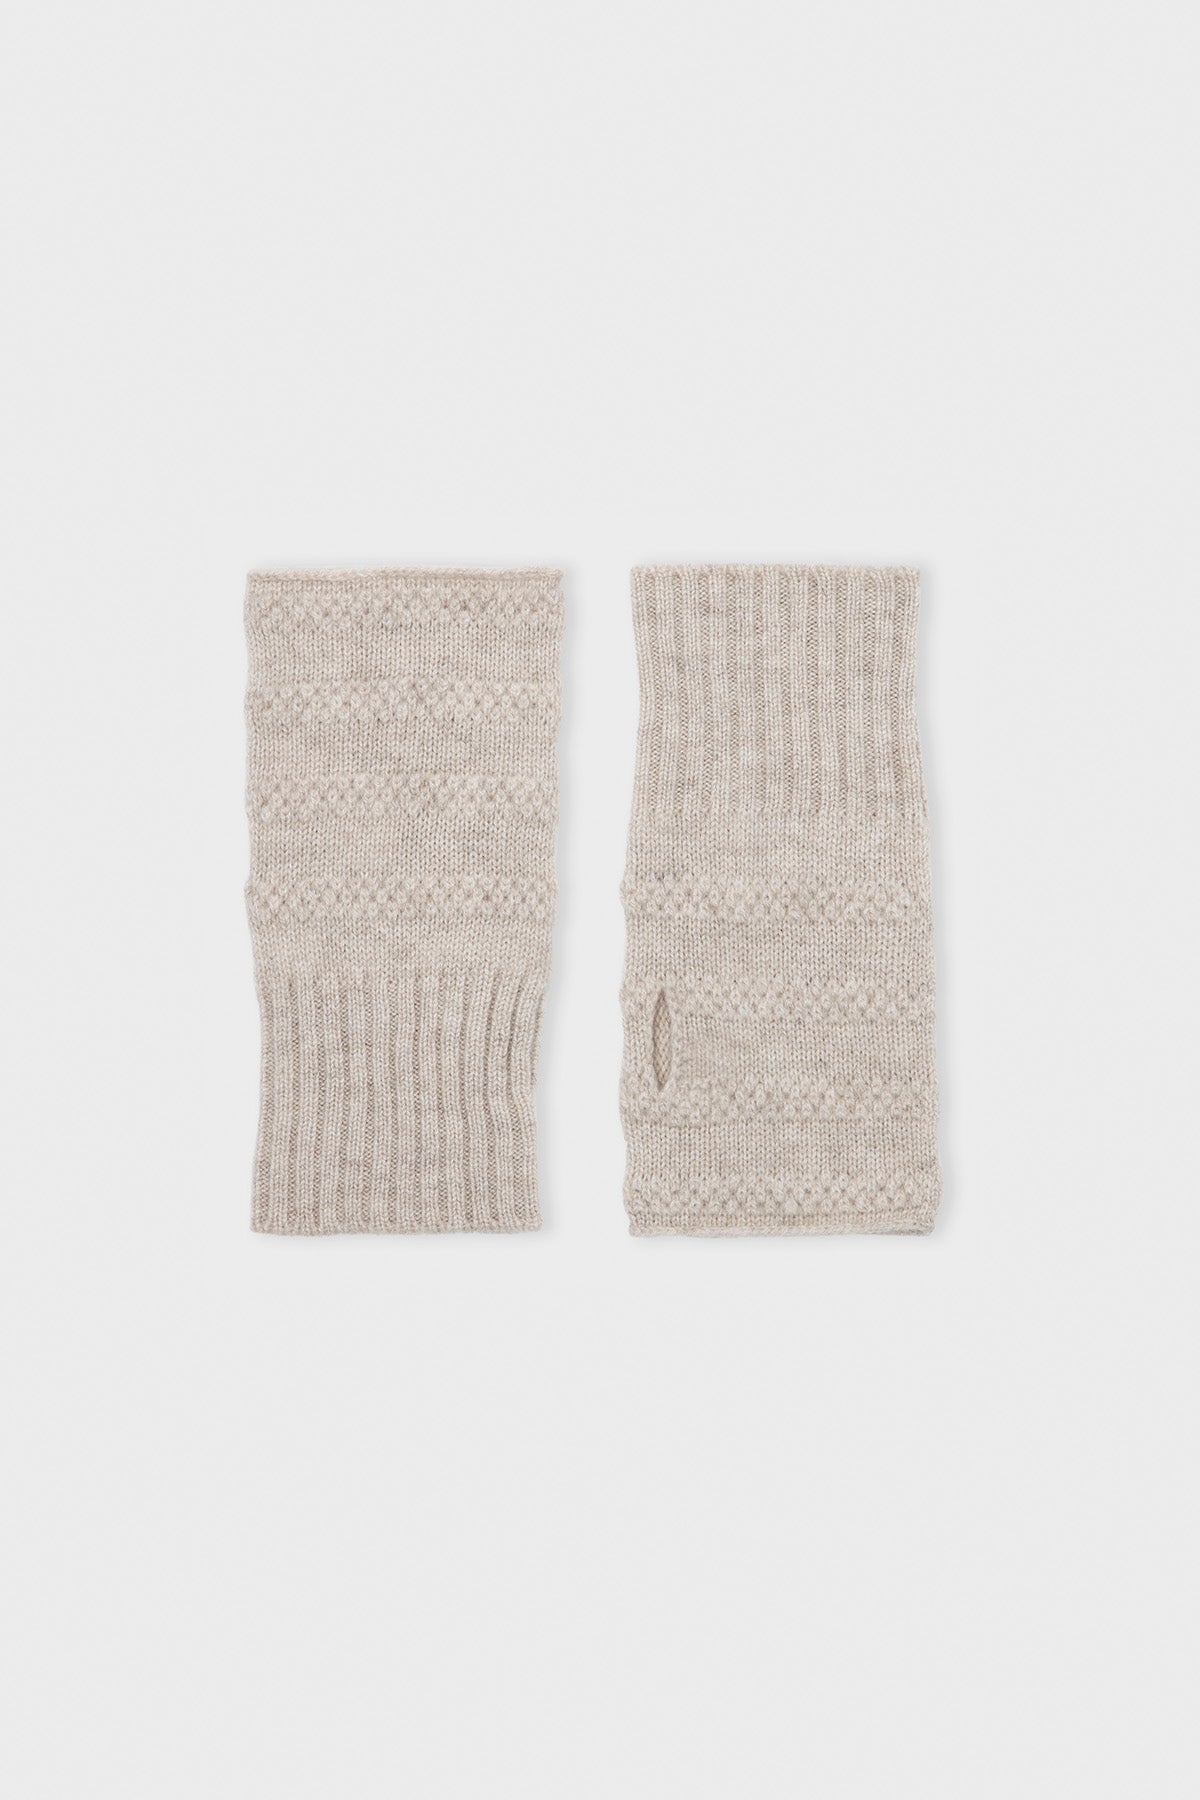 CARE BY ME 100% Cashmere Womens Mea Handwarmers